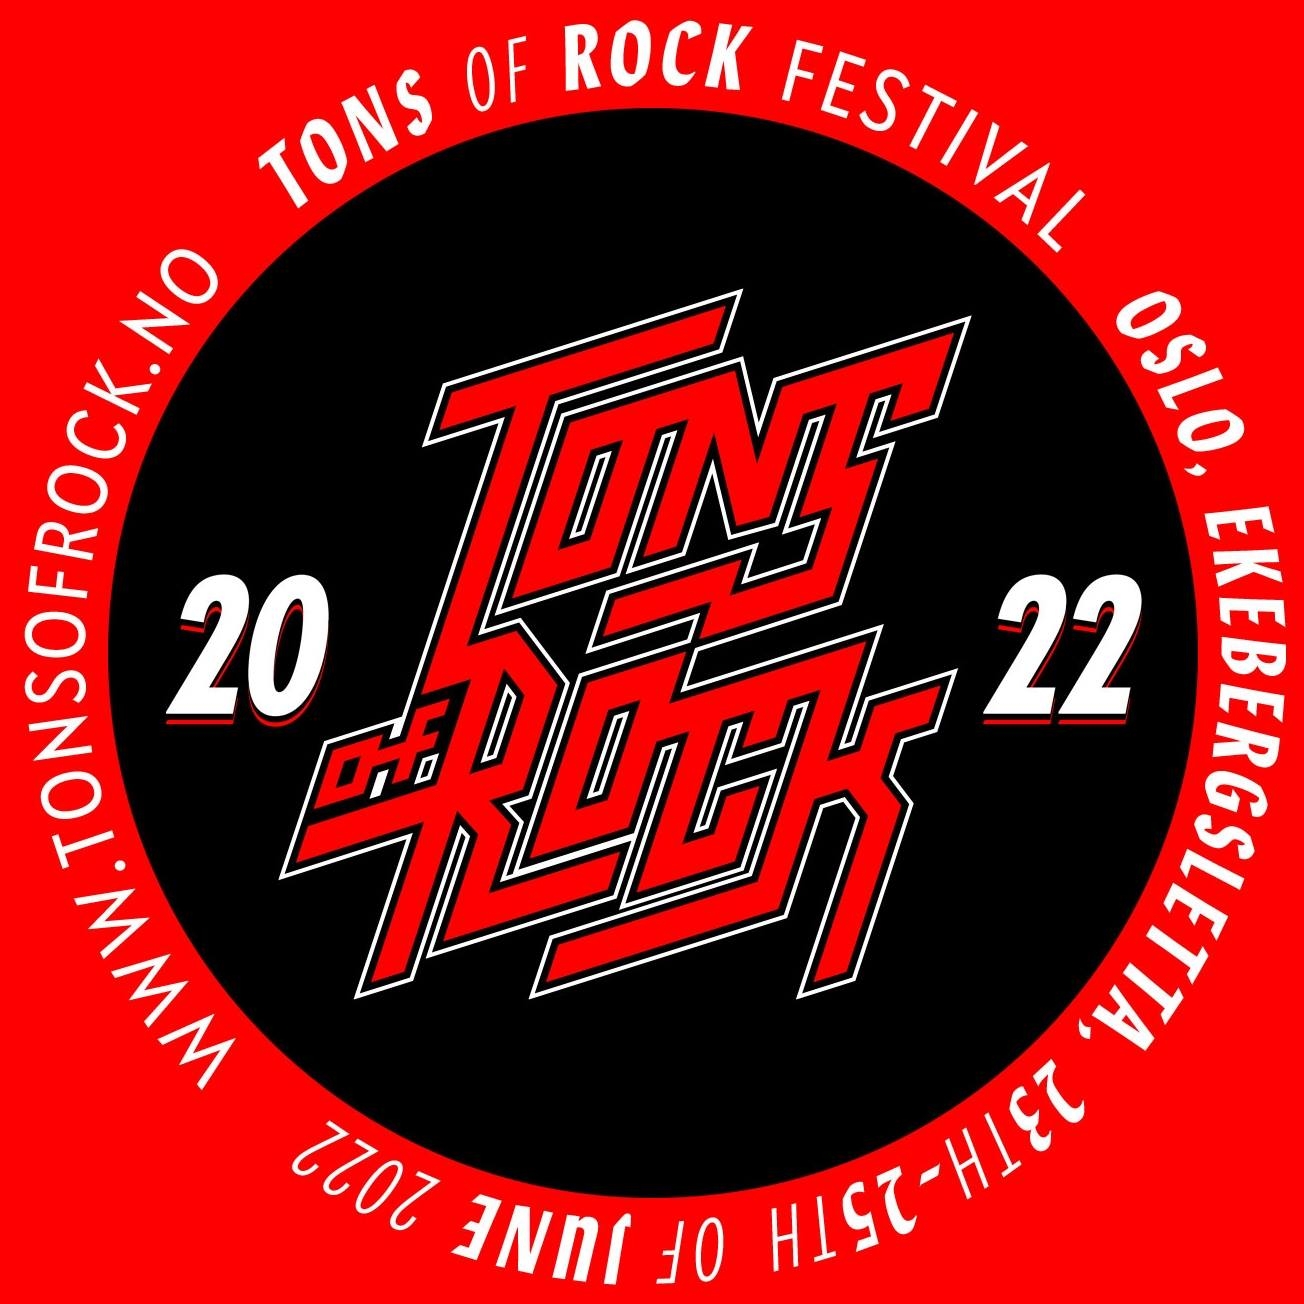 You are currently viewing The Norwegian Tons Of Rock festival has been announced with IRON MAIDEN as headliners!